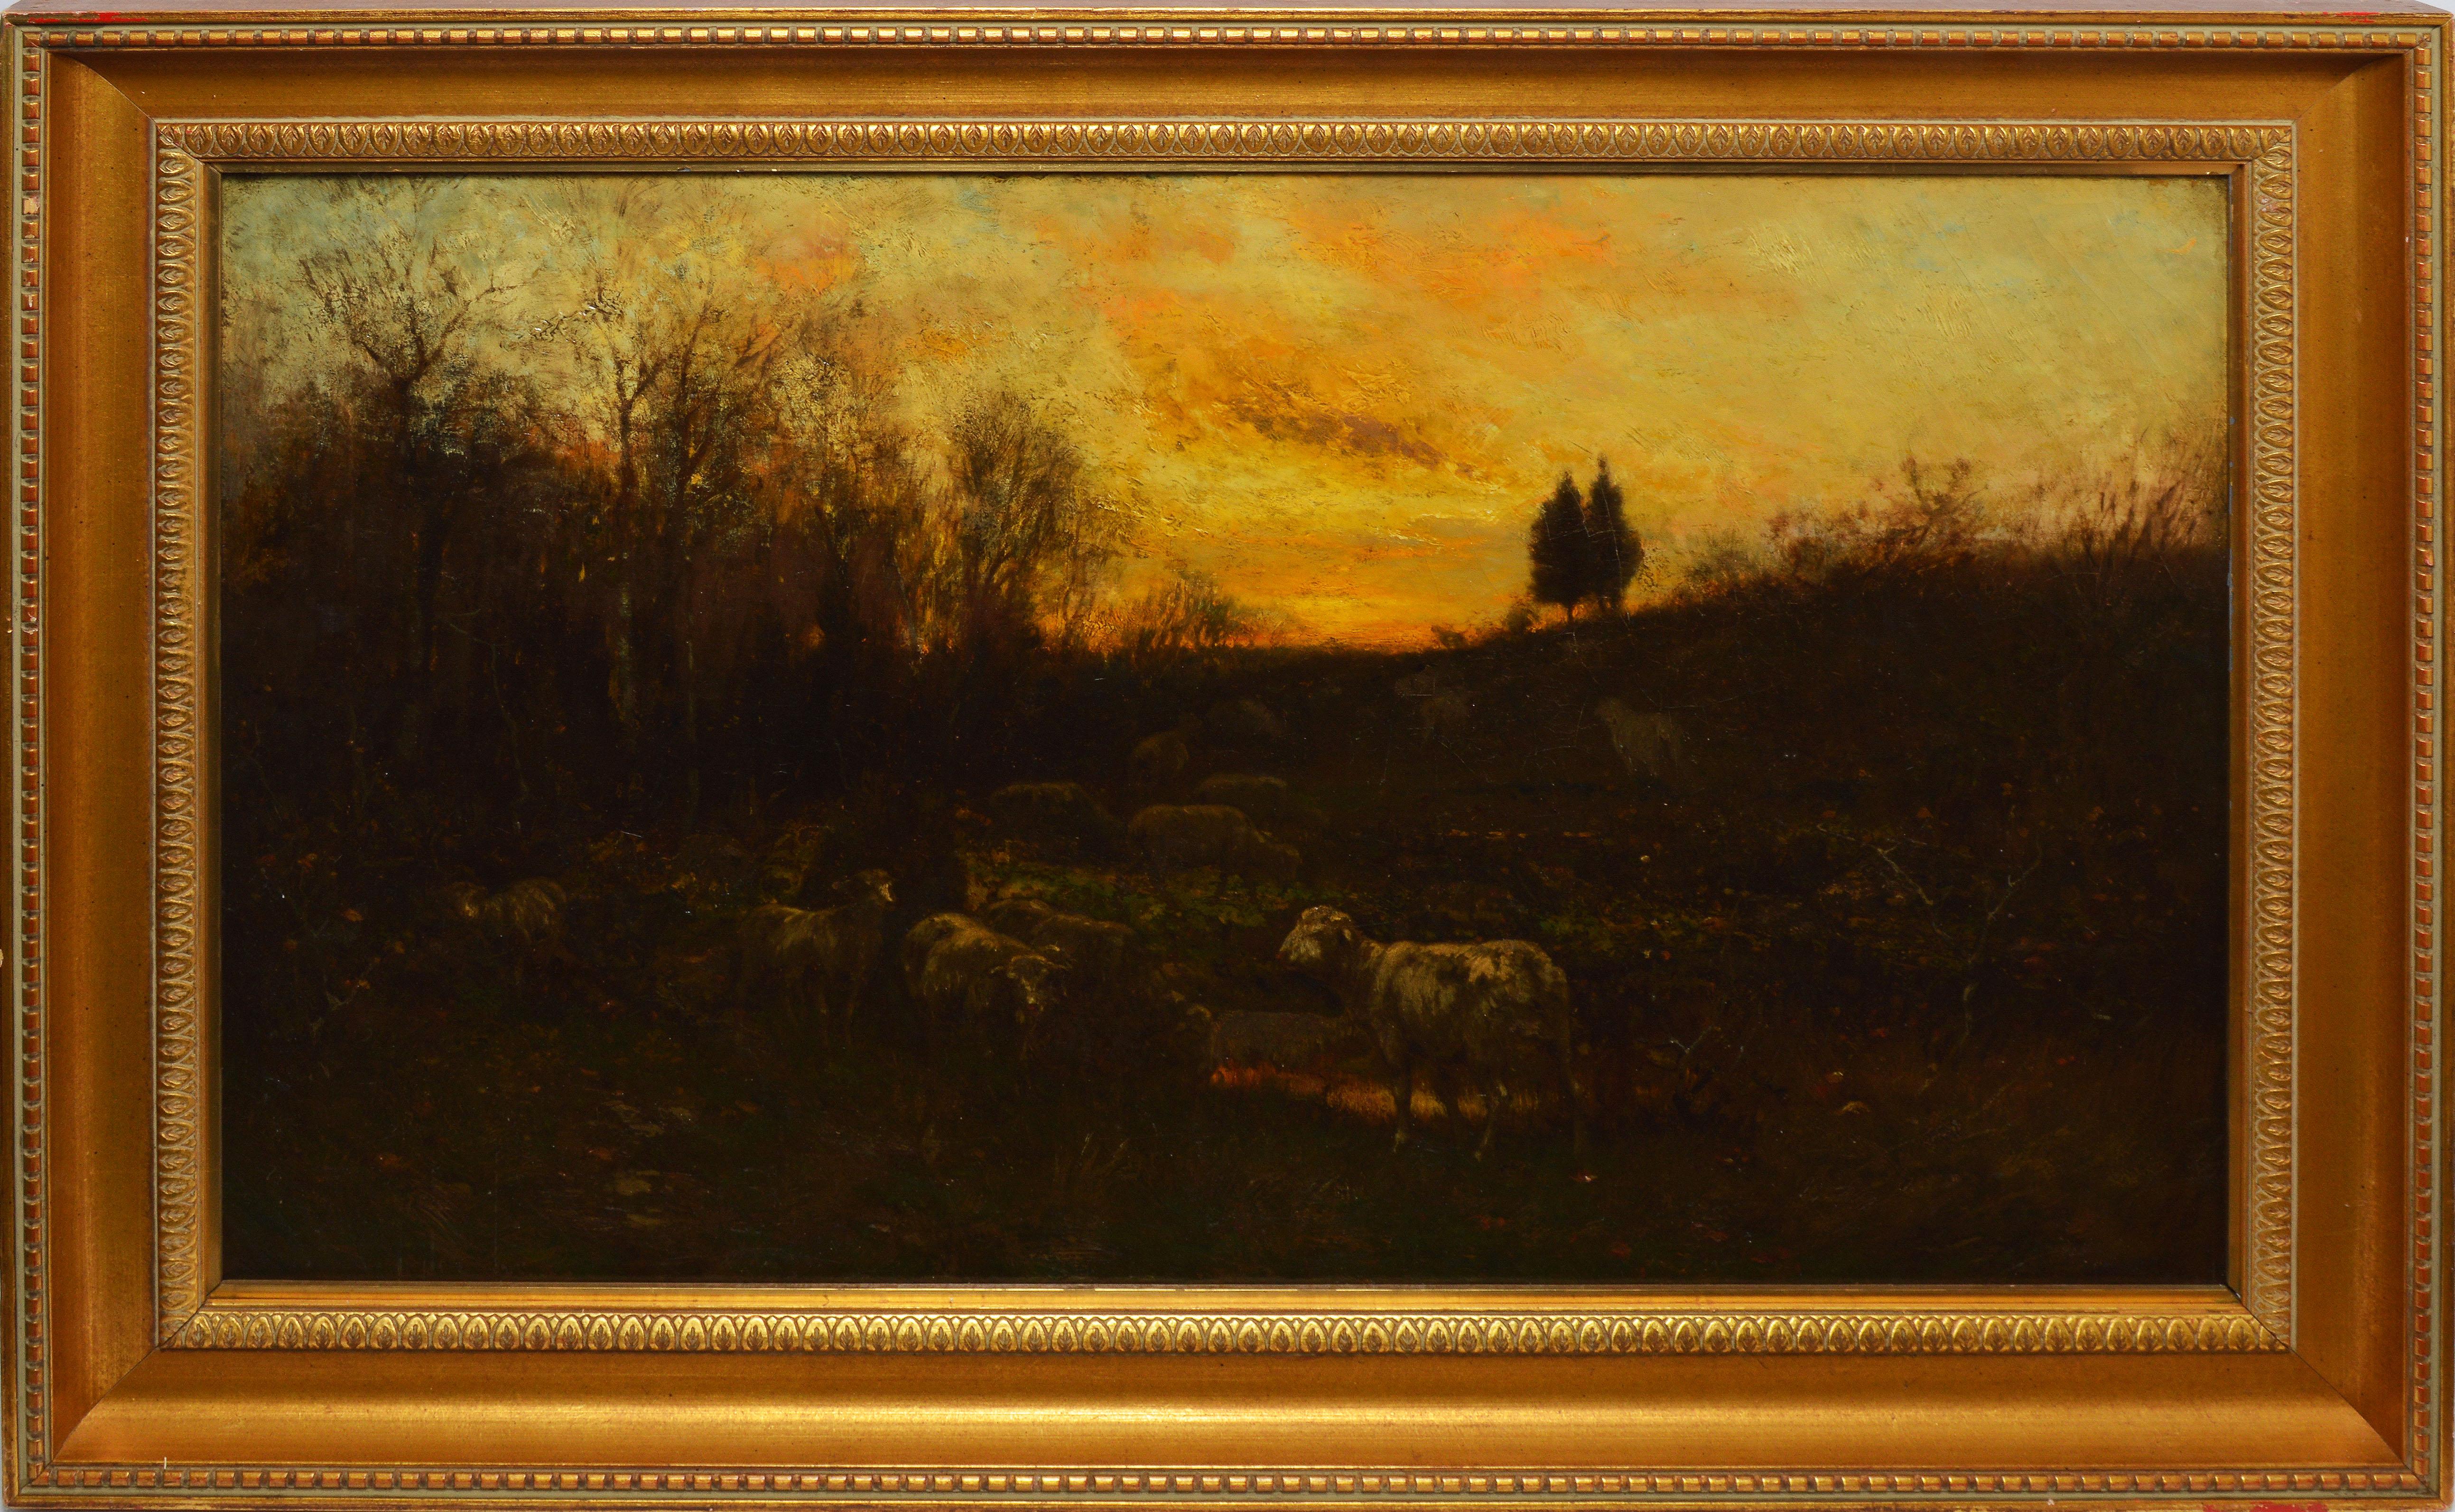 Antique American tonalist sunset landscape with sheep by Carleton J. Wiggins (1848 - 1932).  Oil on canvas, circa 1880.  Unsigned.  Displayed in a giltwood frame.  Image, 32"L x 20"H, overall 38"L x 26"H.